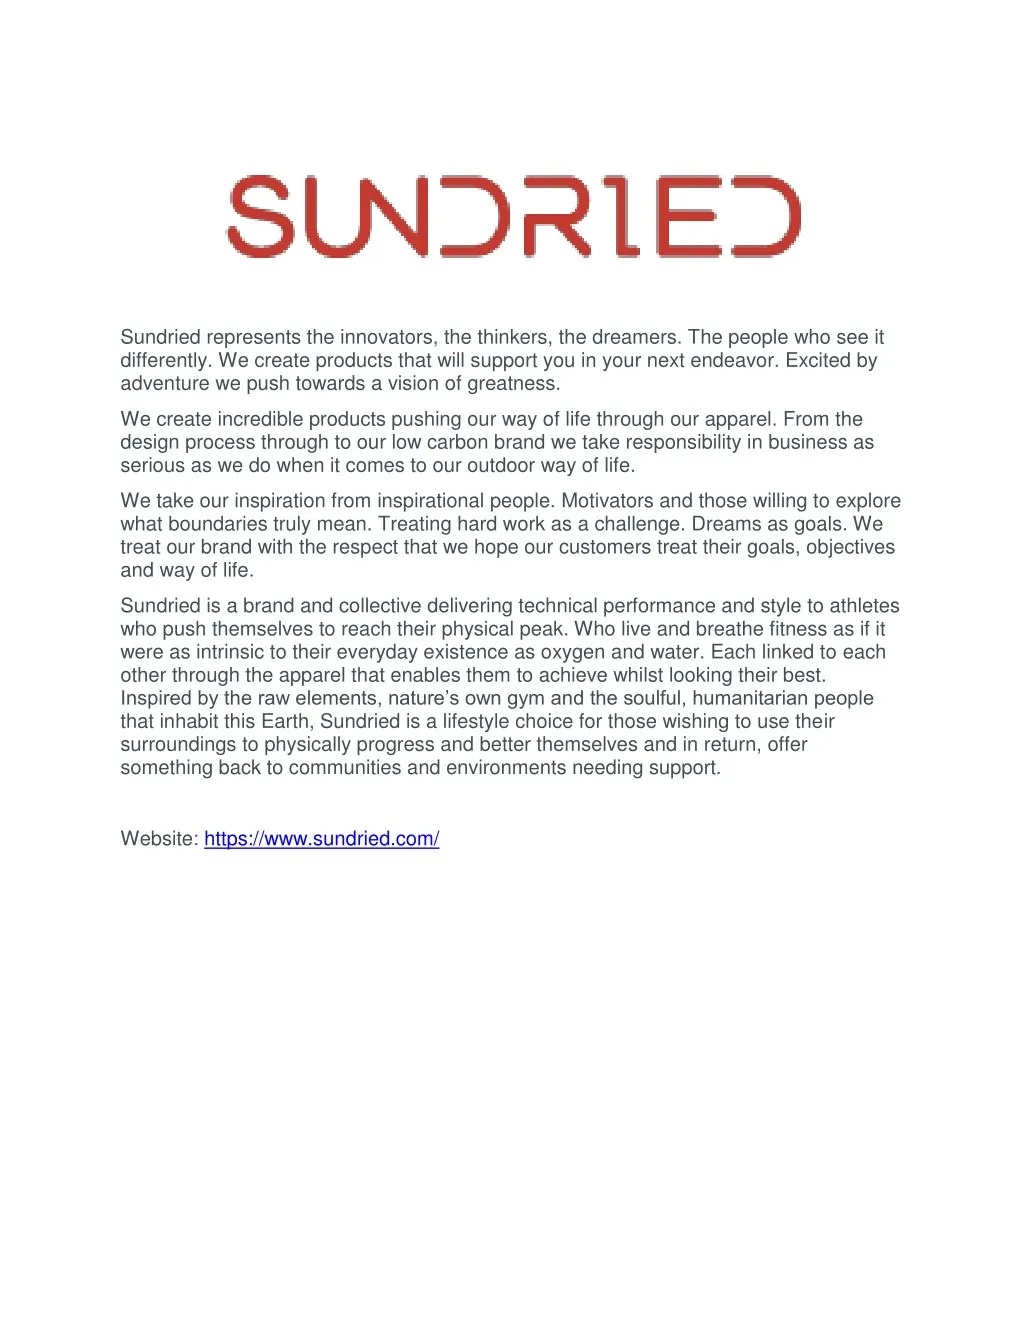 sundried represents the innovators the thinkers